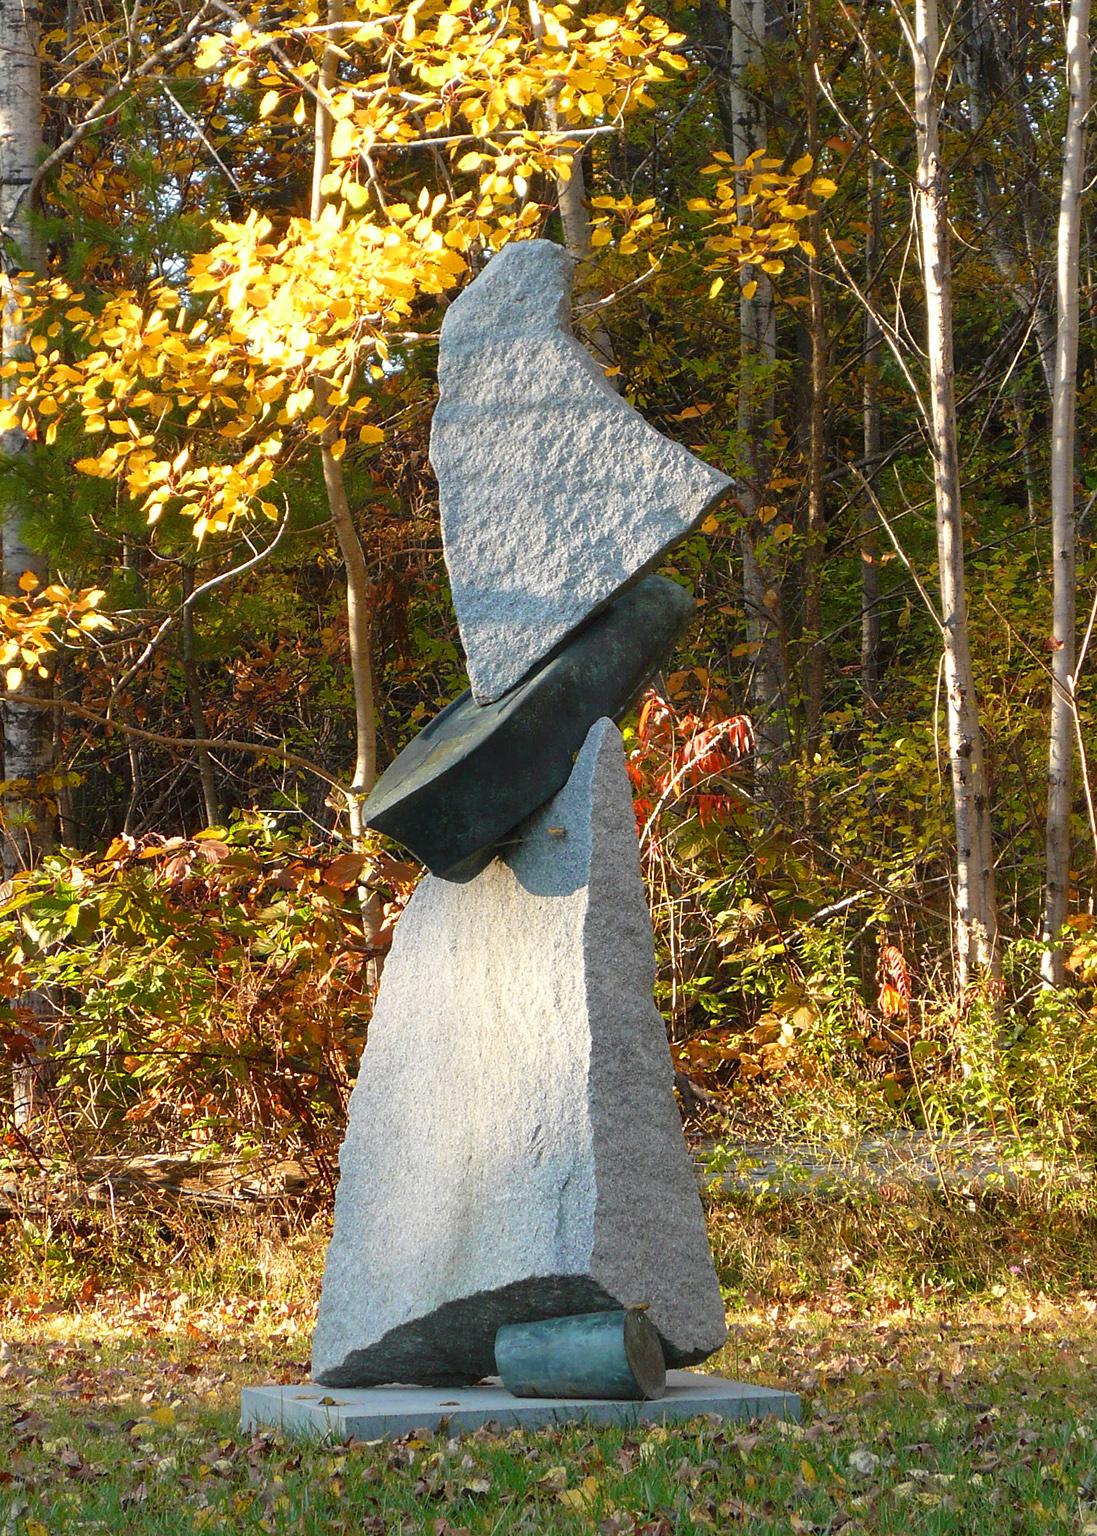 "Saxum Velum (stone sail)" by John Van Alstine
Granite and bronze

The sculpture of John Van Alstine beautifully, and powerfully, balances the union of stone and metal, while exploring the relationship of the purely natural and the man-made. He has